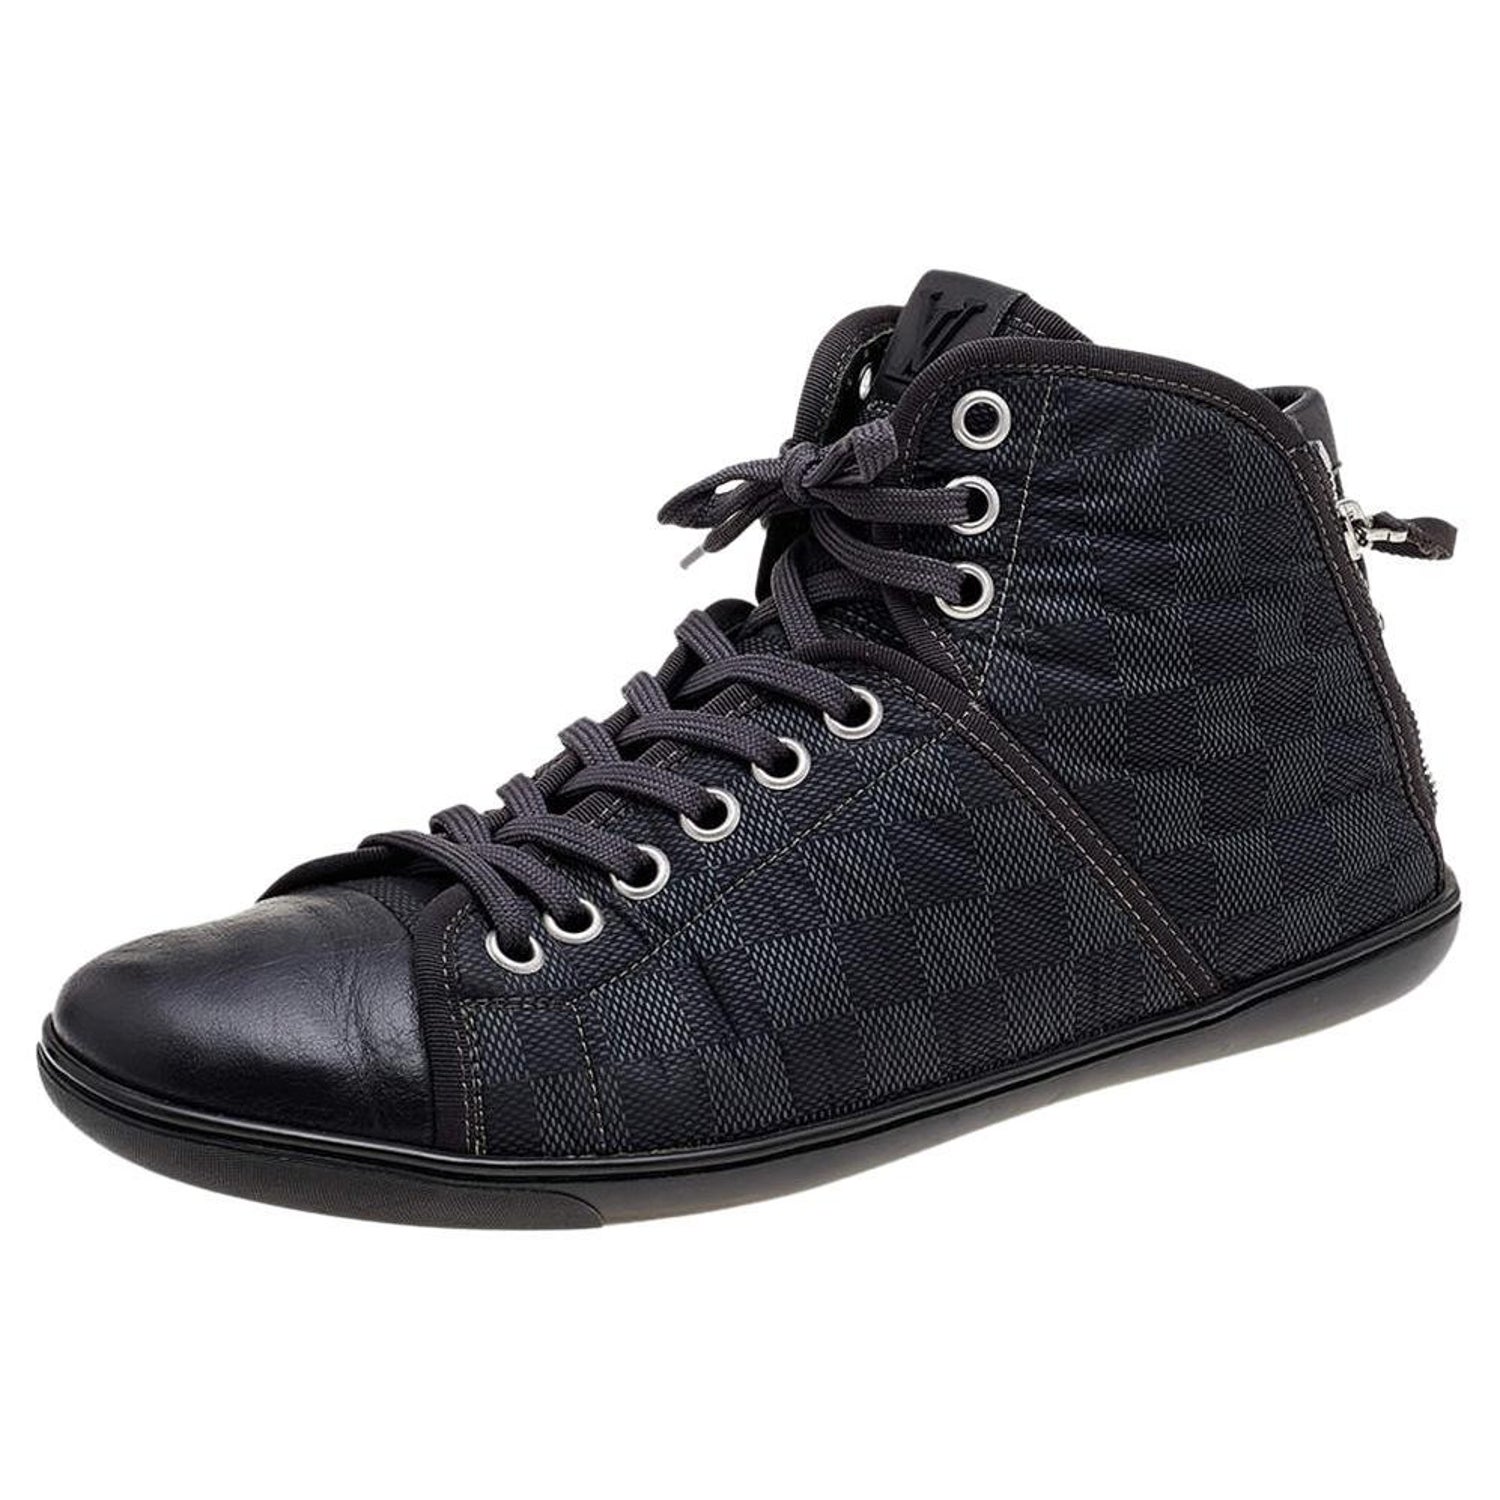 Louis Vuitton Damier Graphite Fabric and Suede Trim Zip Up High